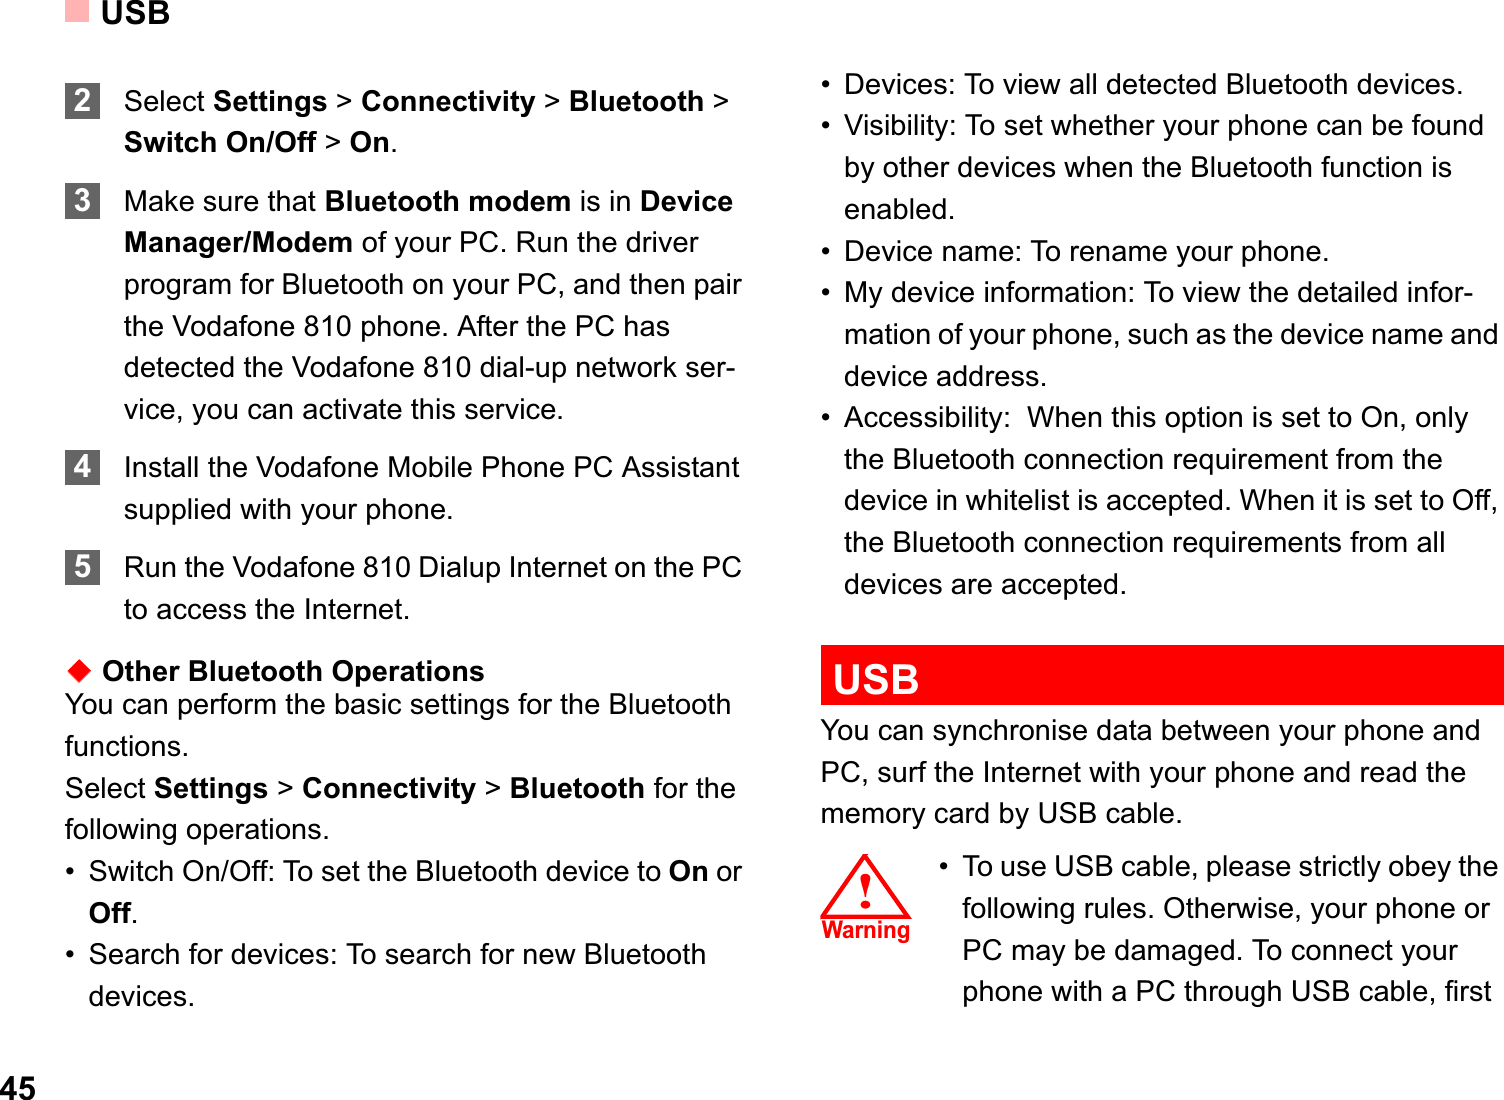 USB452Select Settings &gt; Connectivity &gt; Bluetooth &gt; Switch On/Off &gt; On.3Make sure that Bluetooth modem is in Device Manager/Modem of your PC. Run the driver program for Bluetooth on your PC, and then pair the Vodafone 810 phone. After the PC has detected the Vodafone 810 dial-up network ser-vice, you can activate this service.4Install the Vodafone Mobile Phone PC Assistant supplied with your phone. 5Run the Vodafone 810 Dialup Internet on the PC to access the Internet.ƹOther Bluetooth OperationsYou can perform the basic settings for the Bluetooth functions.Select Settings &gt; Connectivity &gt; Bluetooth for the following operations.• Switch On/Off: To set the Bluetooth device to On or Off.• Search for devices: To search for new Bluetooth devices.• Devices: To view all detected Bluetooth devices.• Visibility: To set whether your phone can be found by other devices when the Bluetooth function is enabled.• Device name: To rename your phone.• My device information: To view the detailed infor-mation of your phone, such as the device name and device address.• Accessibility:  When this option is set to On, only the Bluetooth connection requirement from the device in whitelist is accepted. When it is set to Off, the Bluetooth connection requirements from all devices are accepted.USBYou can synchronise data between your phone and PC, surf the Internet with your phone and read the memory card by USB cable.!䄺ਞ!Warning• To use USB cable, please strictly obey the following rules. Otherwise, your phone or PC may be damaged. To connect your phone with a PC through USB cable, first 